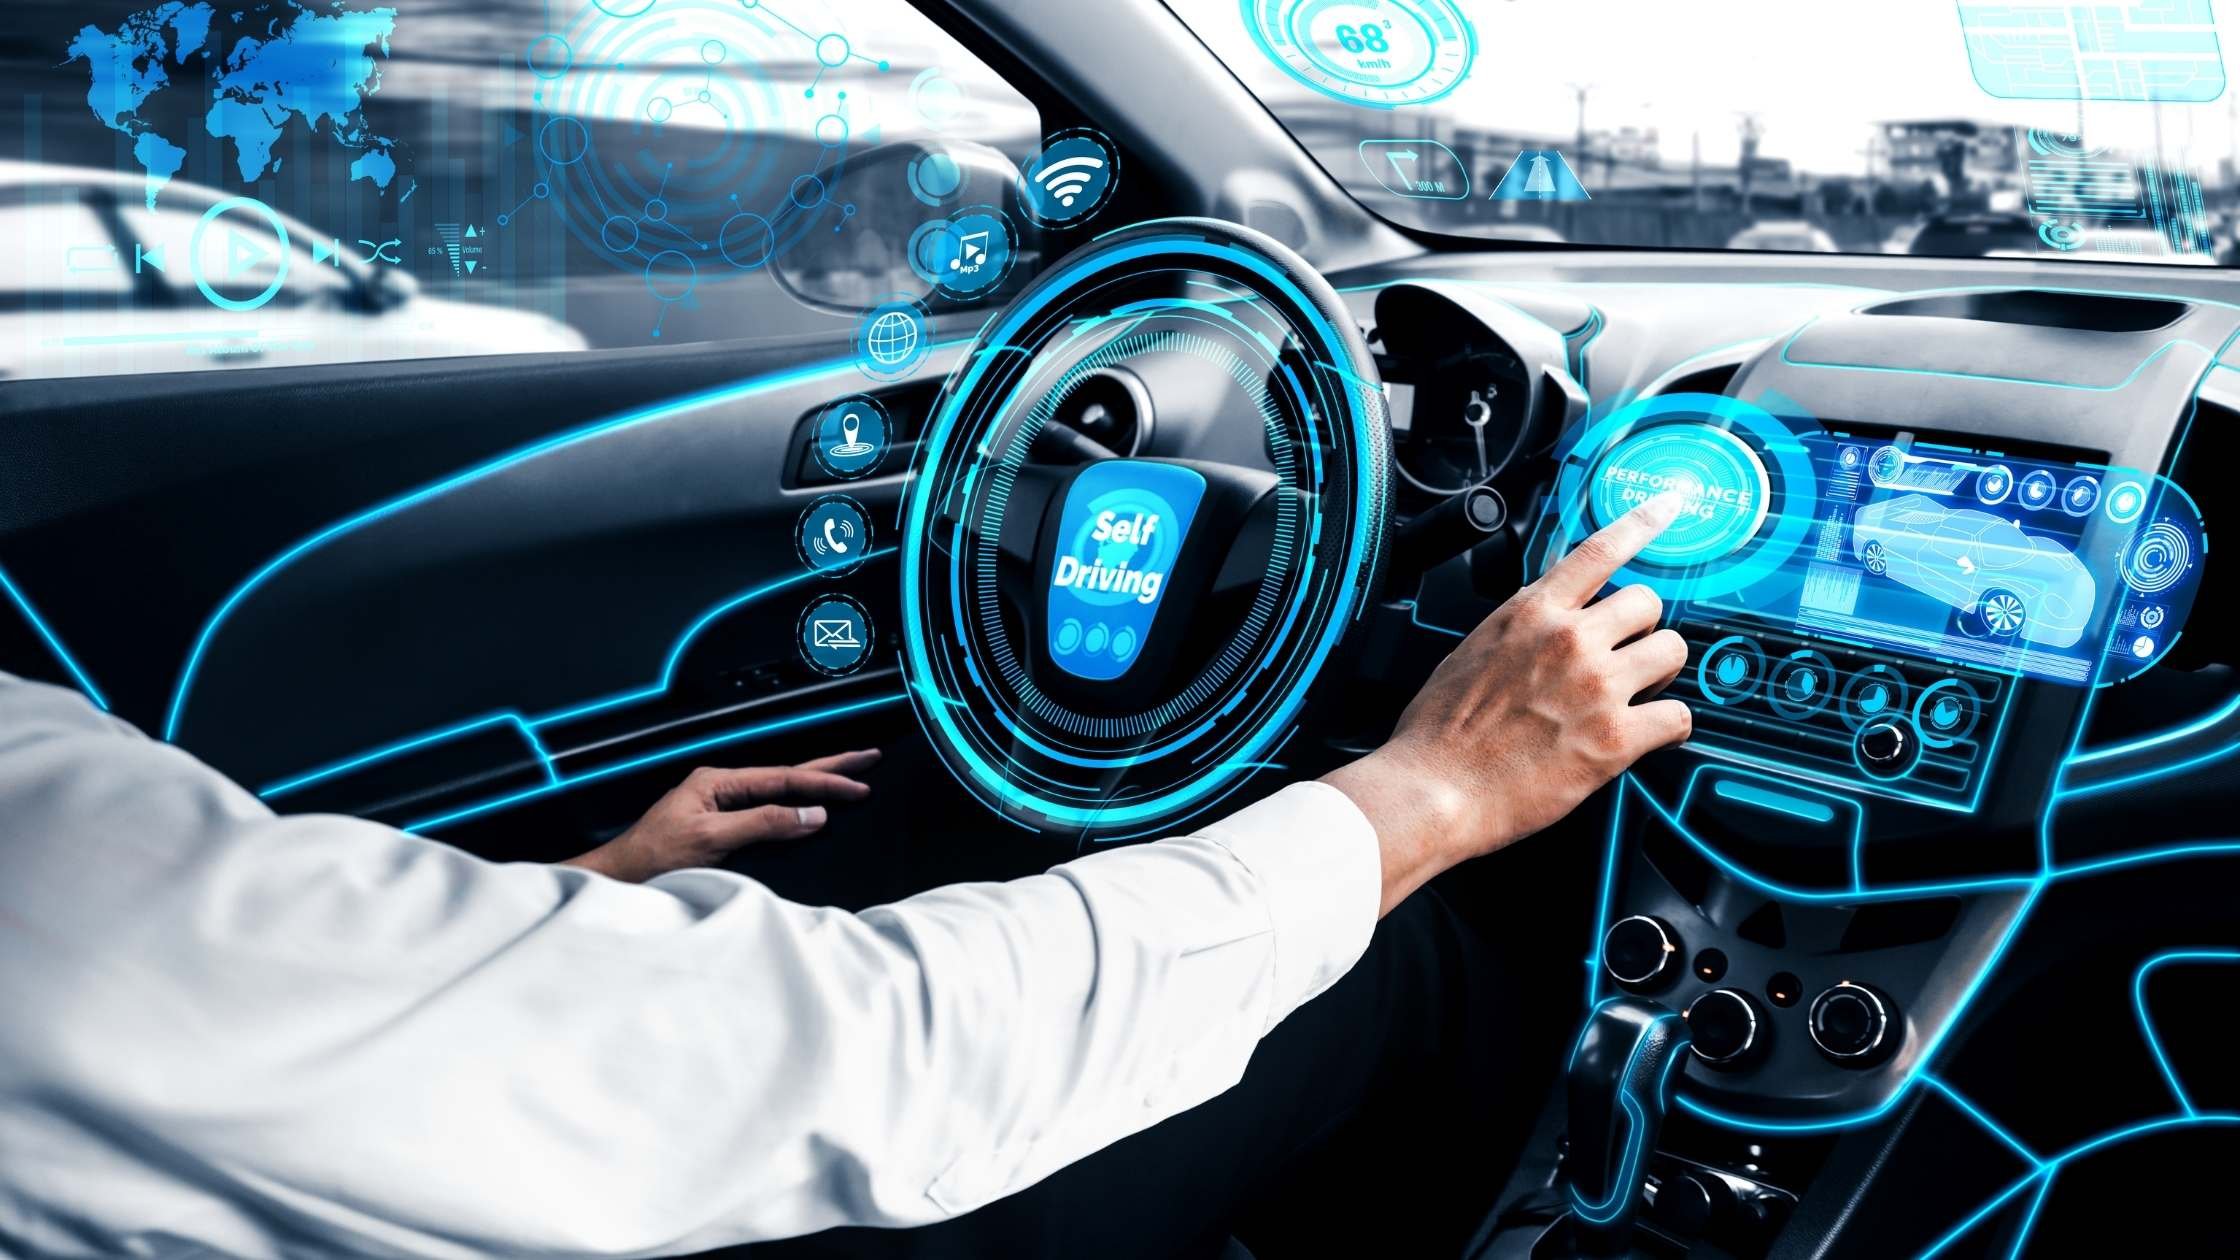 Close up of car interior and driver with a futuristic autonomous vehicle interface.